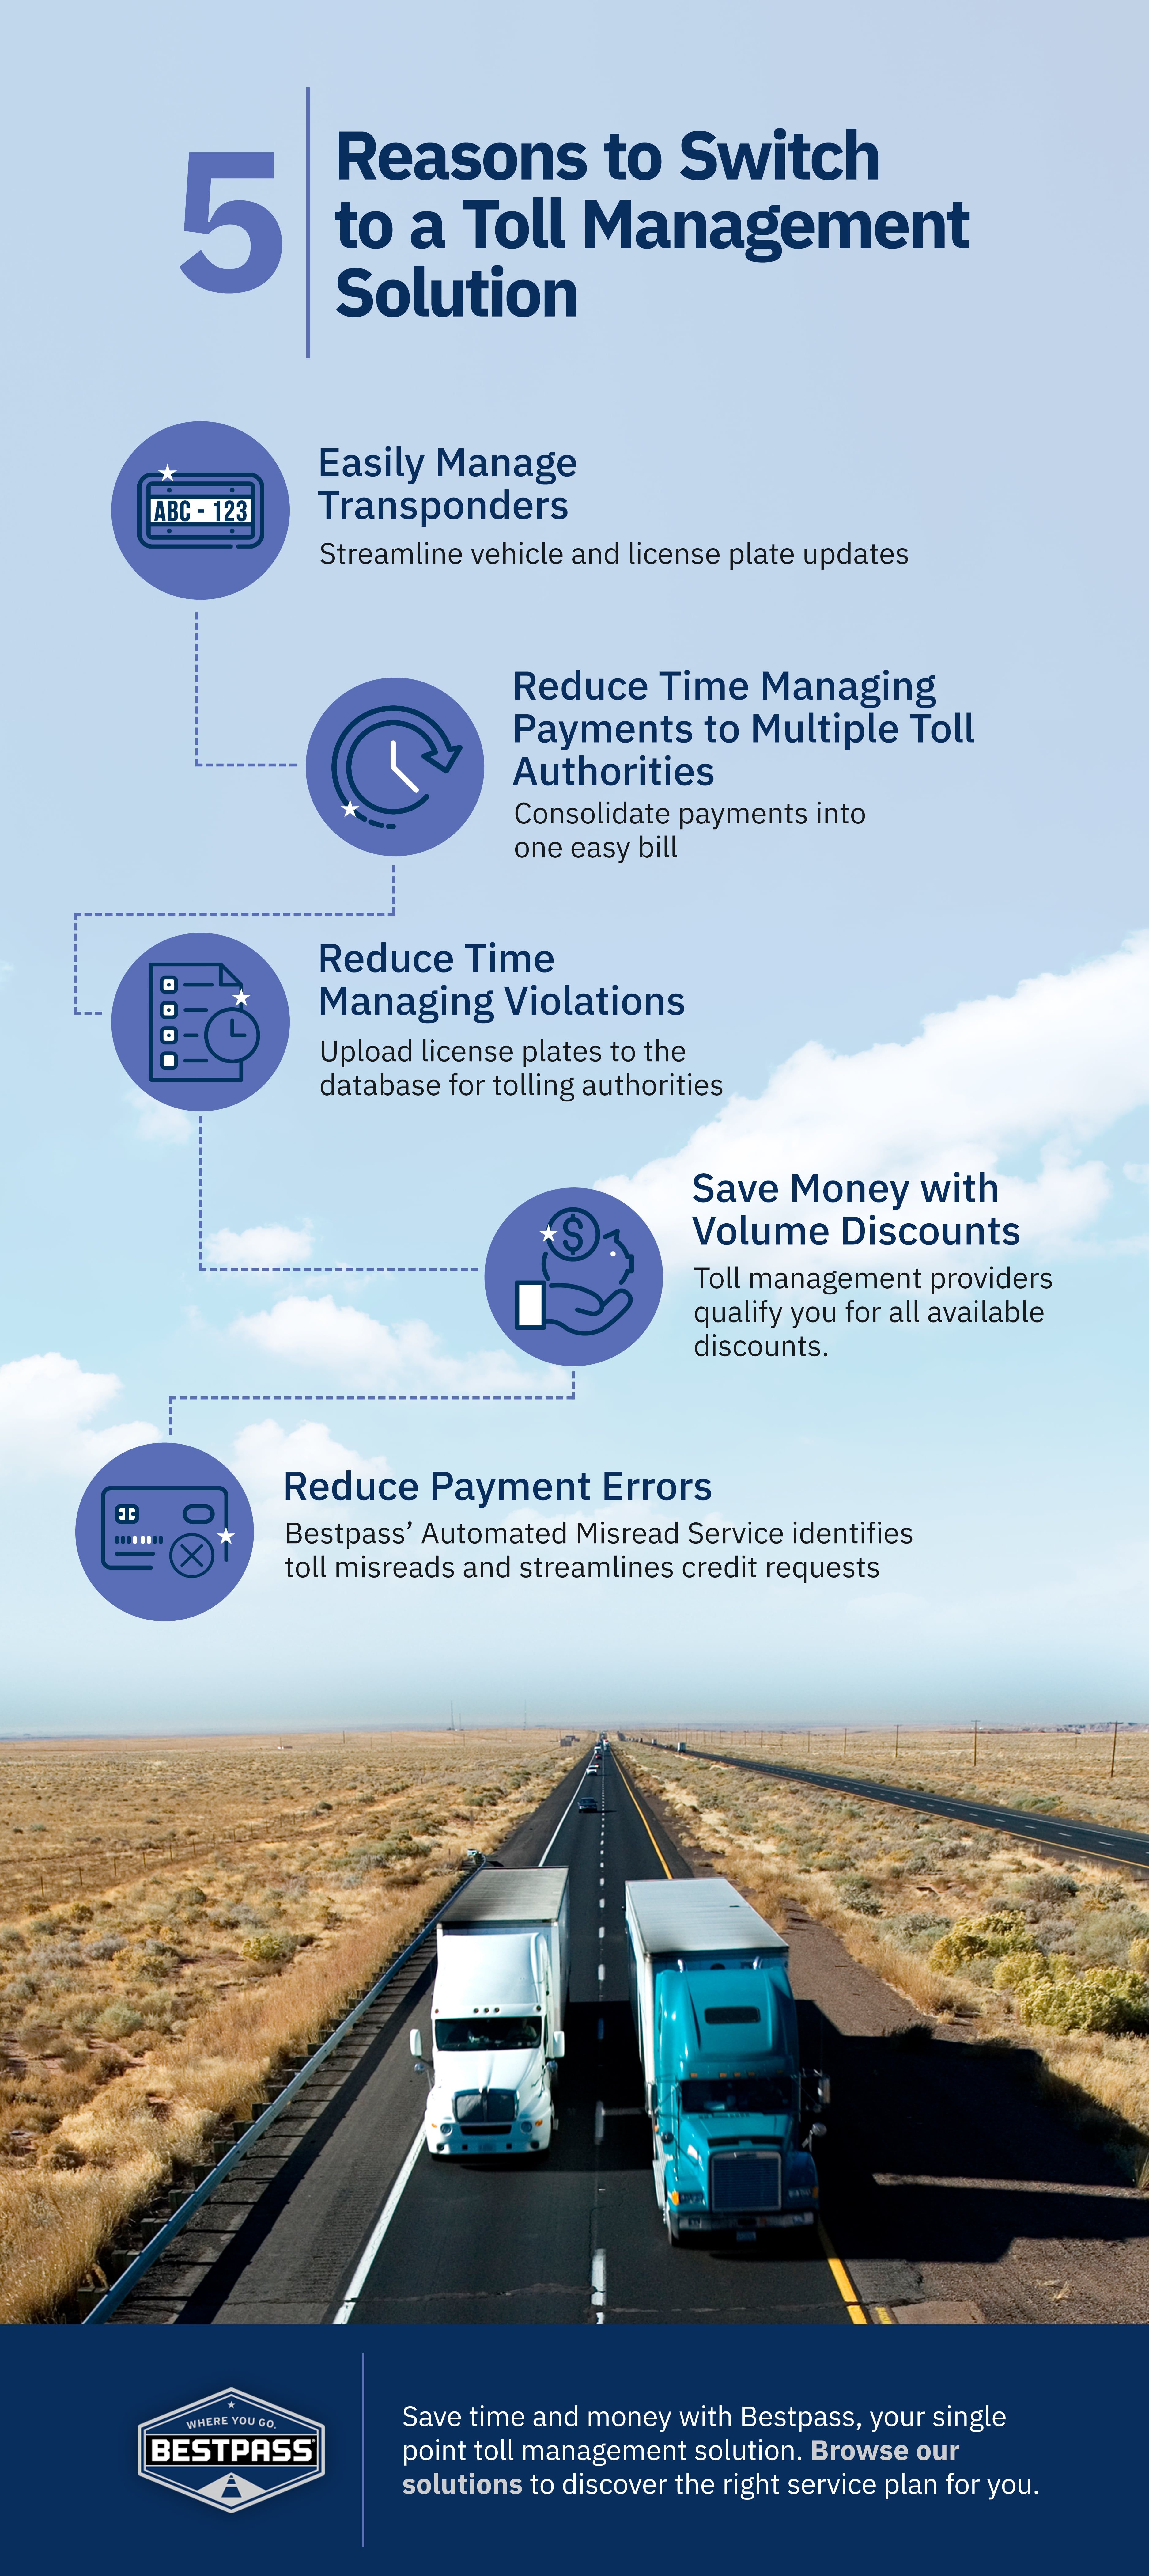 A large blue, black, and purple info graphic displaying the 5 Reasons to Switch to a Toll Management Solution